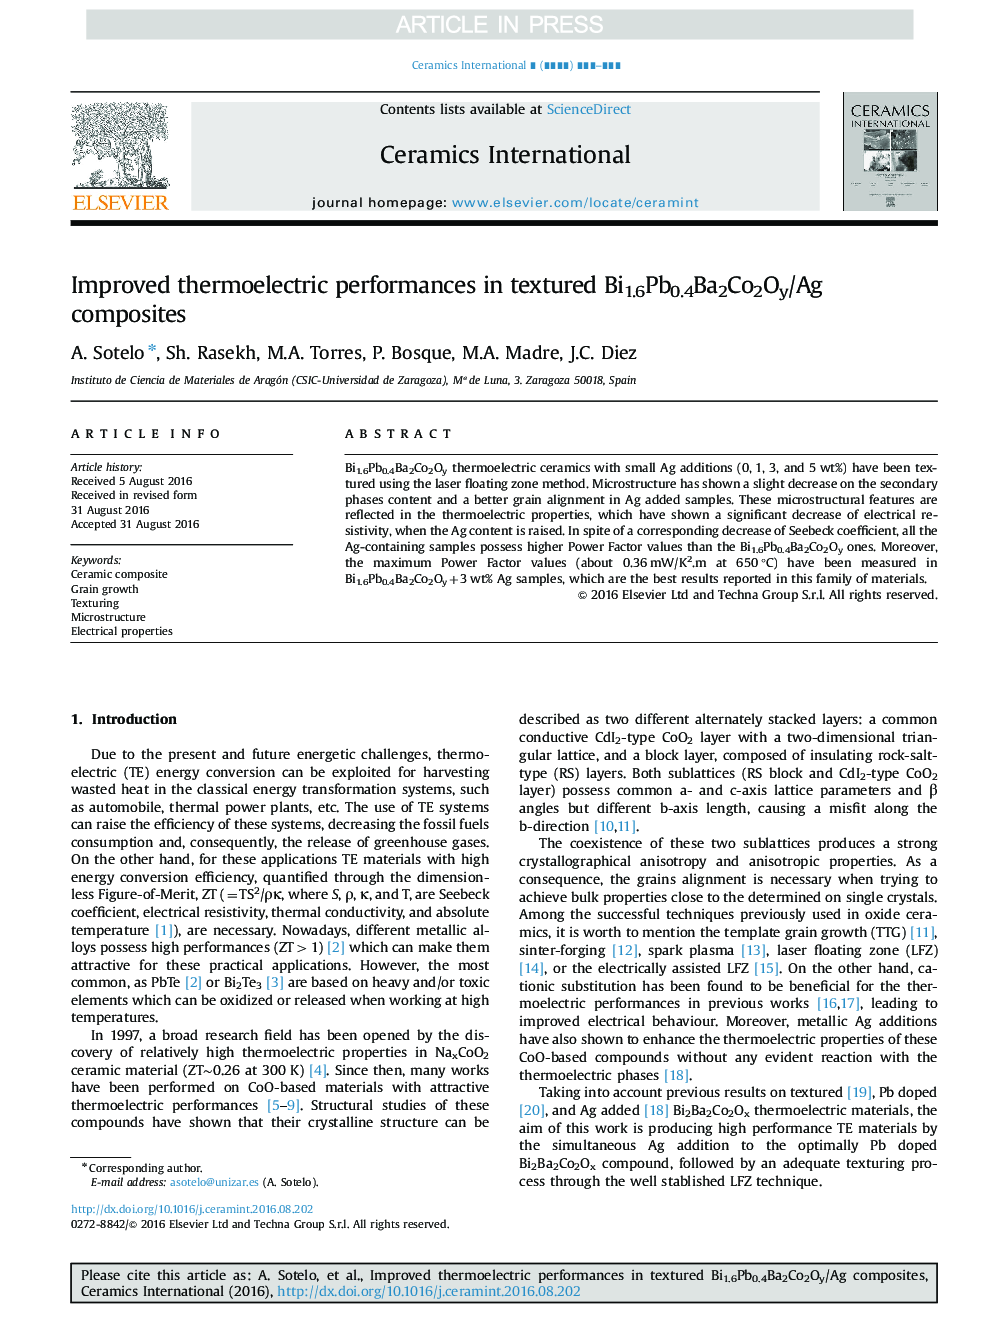 Improved thermoelectric performances in textured Bi1.6Pb0.4Ba2Co2Oy/Ag composites